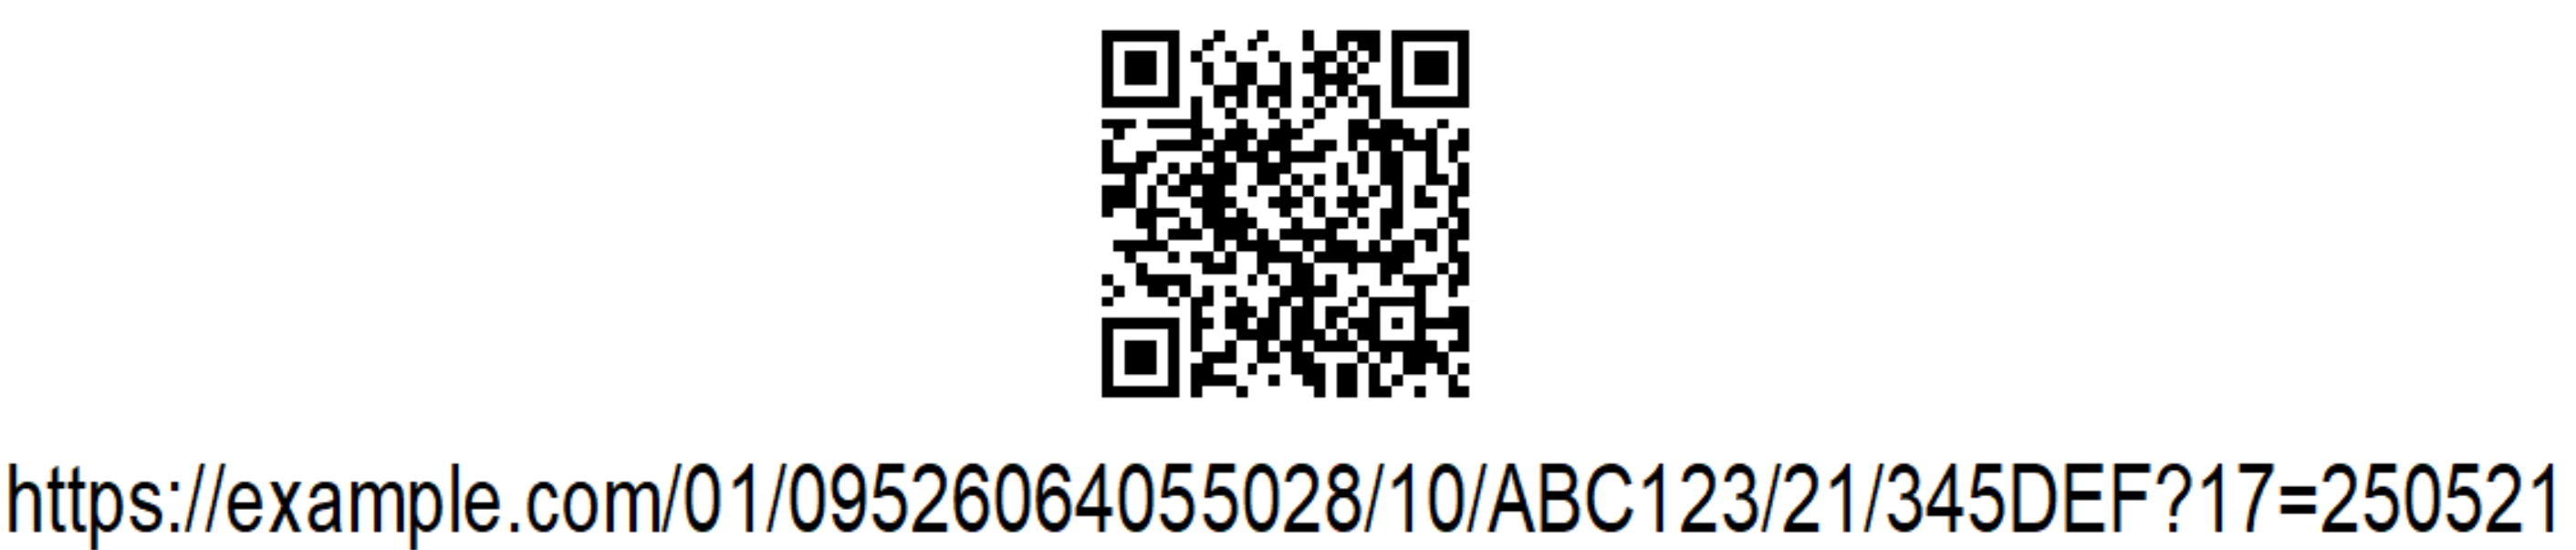 A QR Code with GS1 Digital Link syntax. The full GS1 Digital Link URI is shown below (https://example.com/01/09526064055028/10/ABC123/21/345DEF?17=250521)